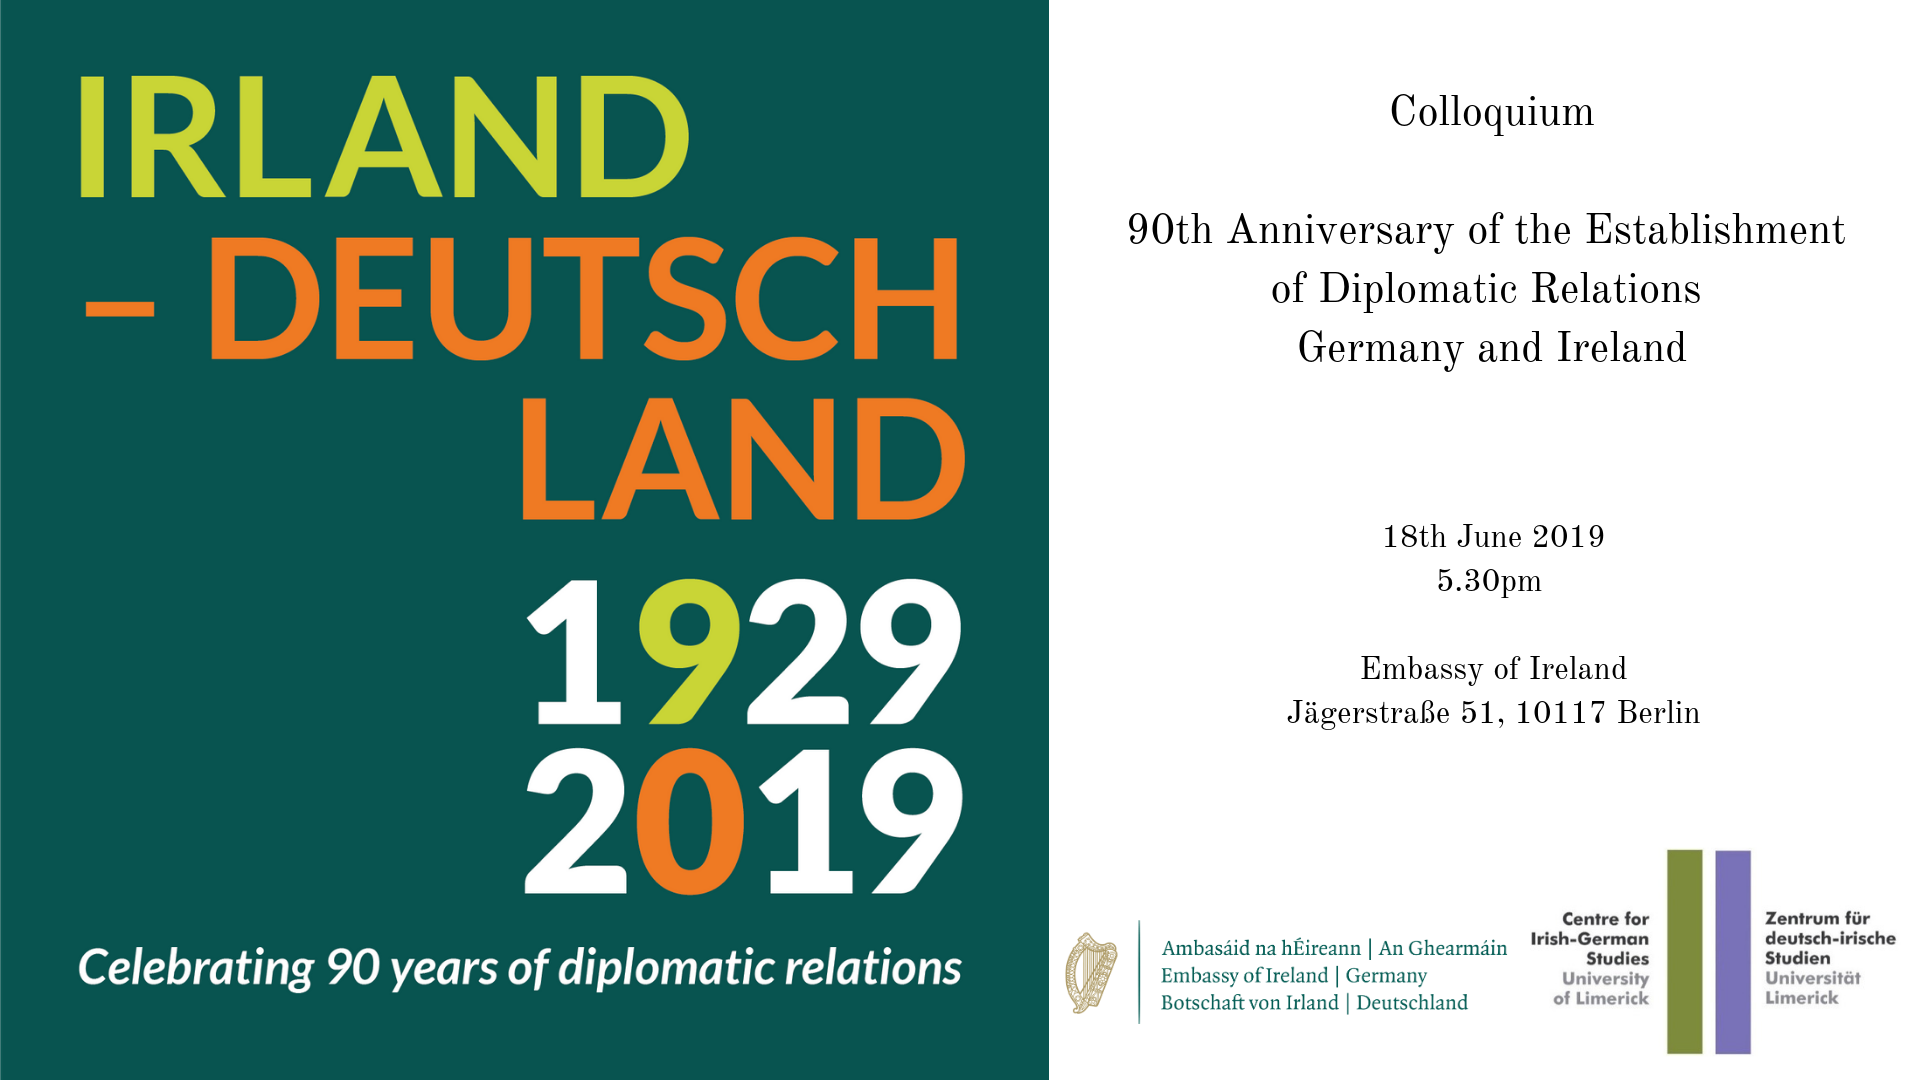 Colloquium     90th Anniversary of the Establishment of Diplomatic Relations Germany and Ireland